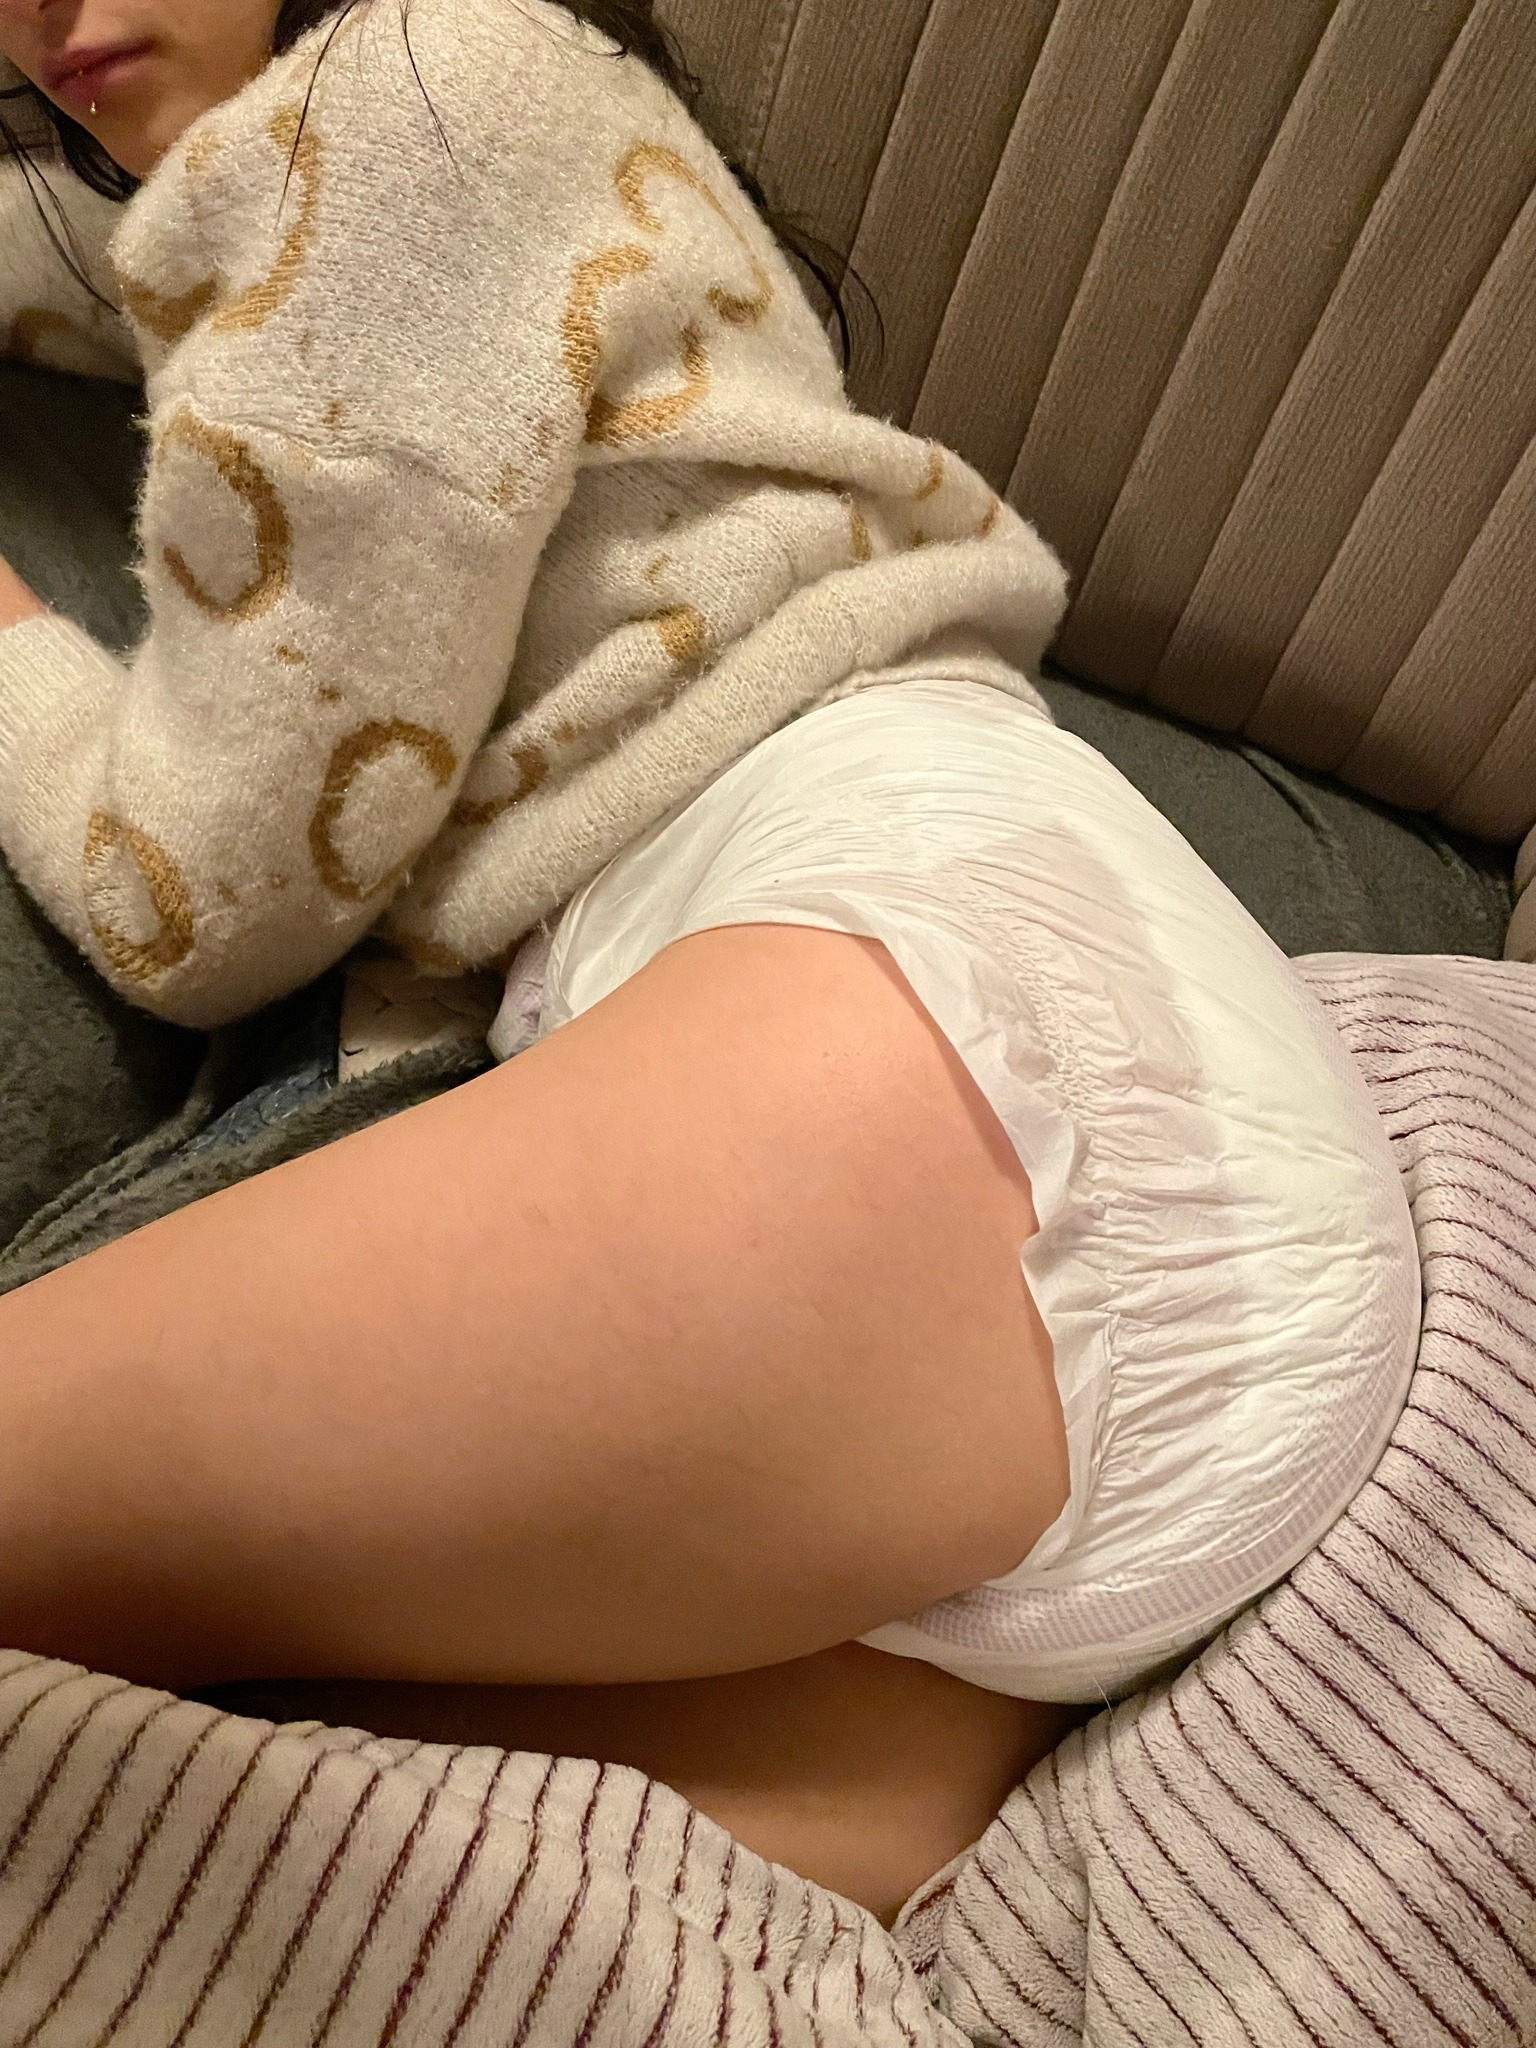 diapergirlmilla:A good thick diaper on. No underwear. The only right way to sit on the couch at night don’t you think? 😍